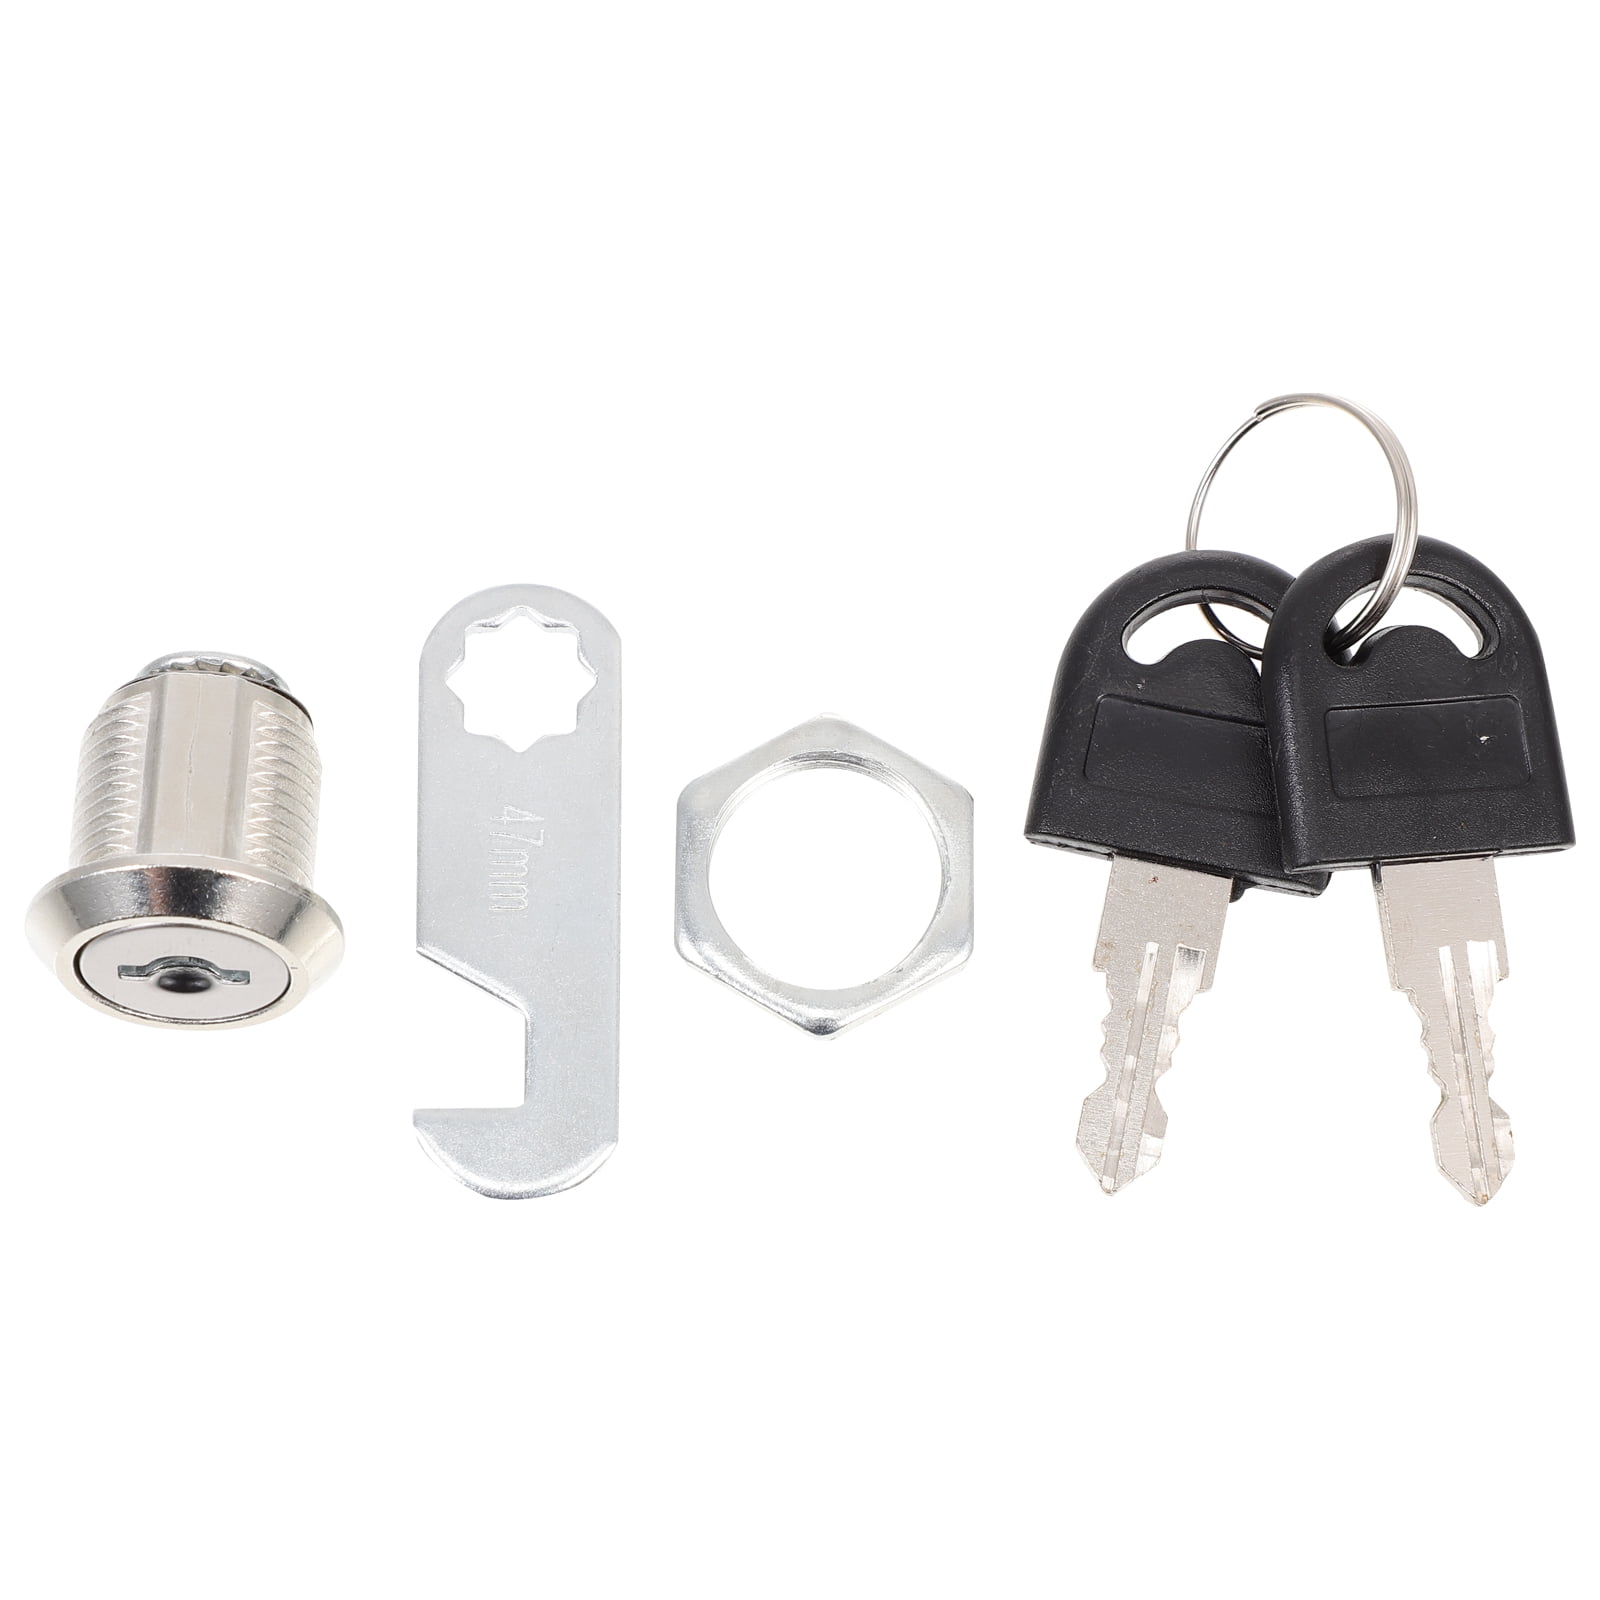 2 Pieces Black Desk Drawer Lock Alloy Lock With 4 Keys Furniture Cylinder  Lock For Office Mailbox Drawer Cupboard16*22mm